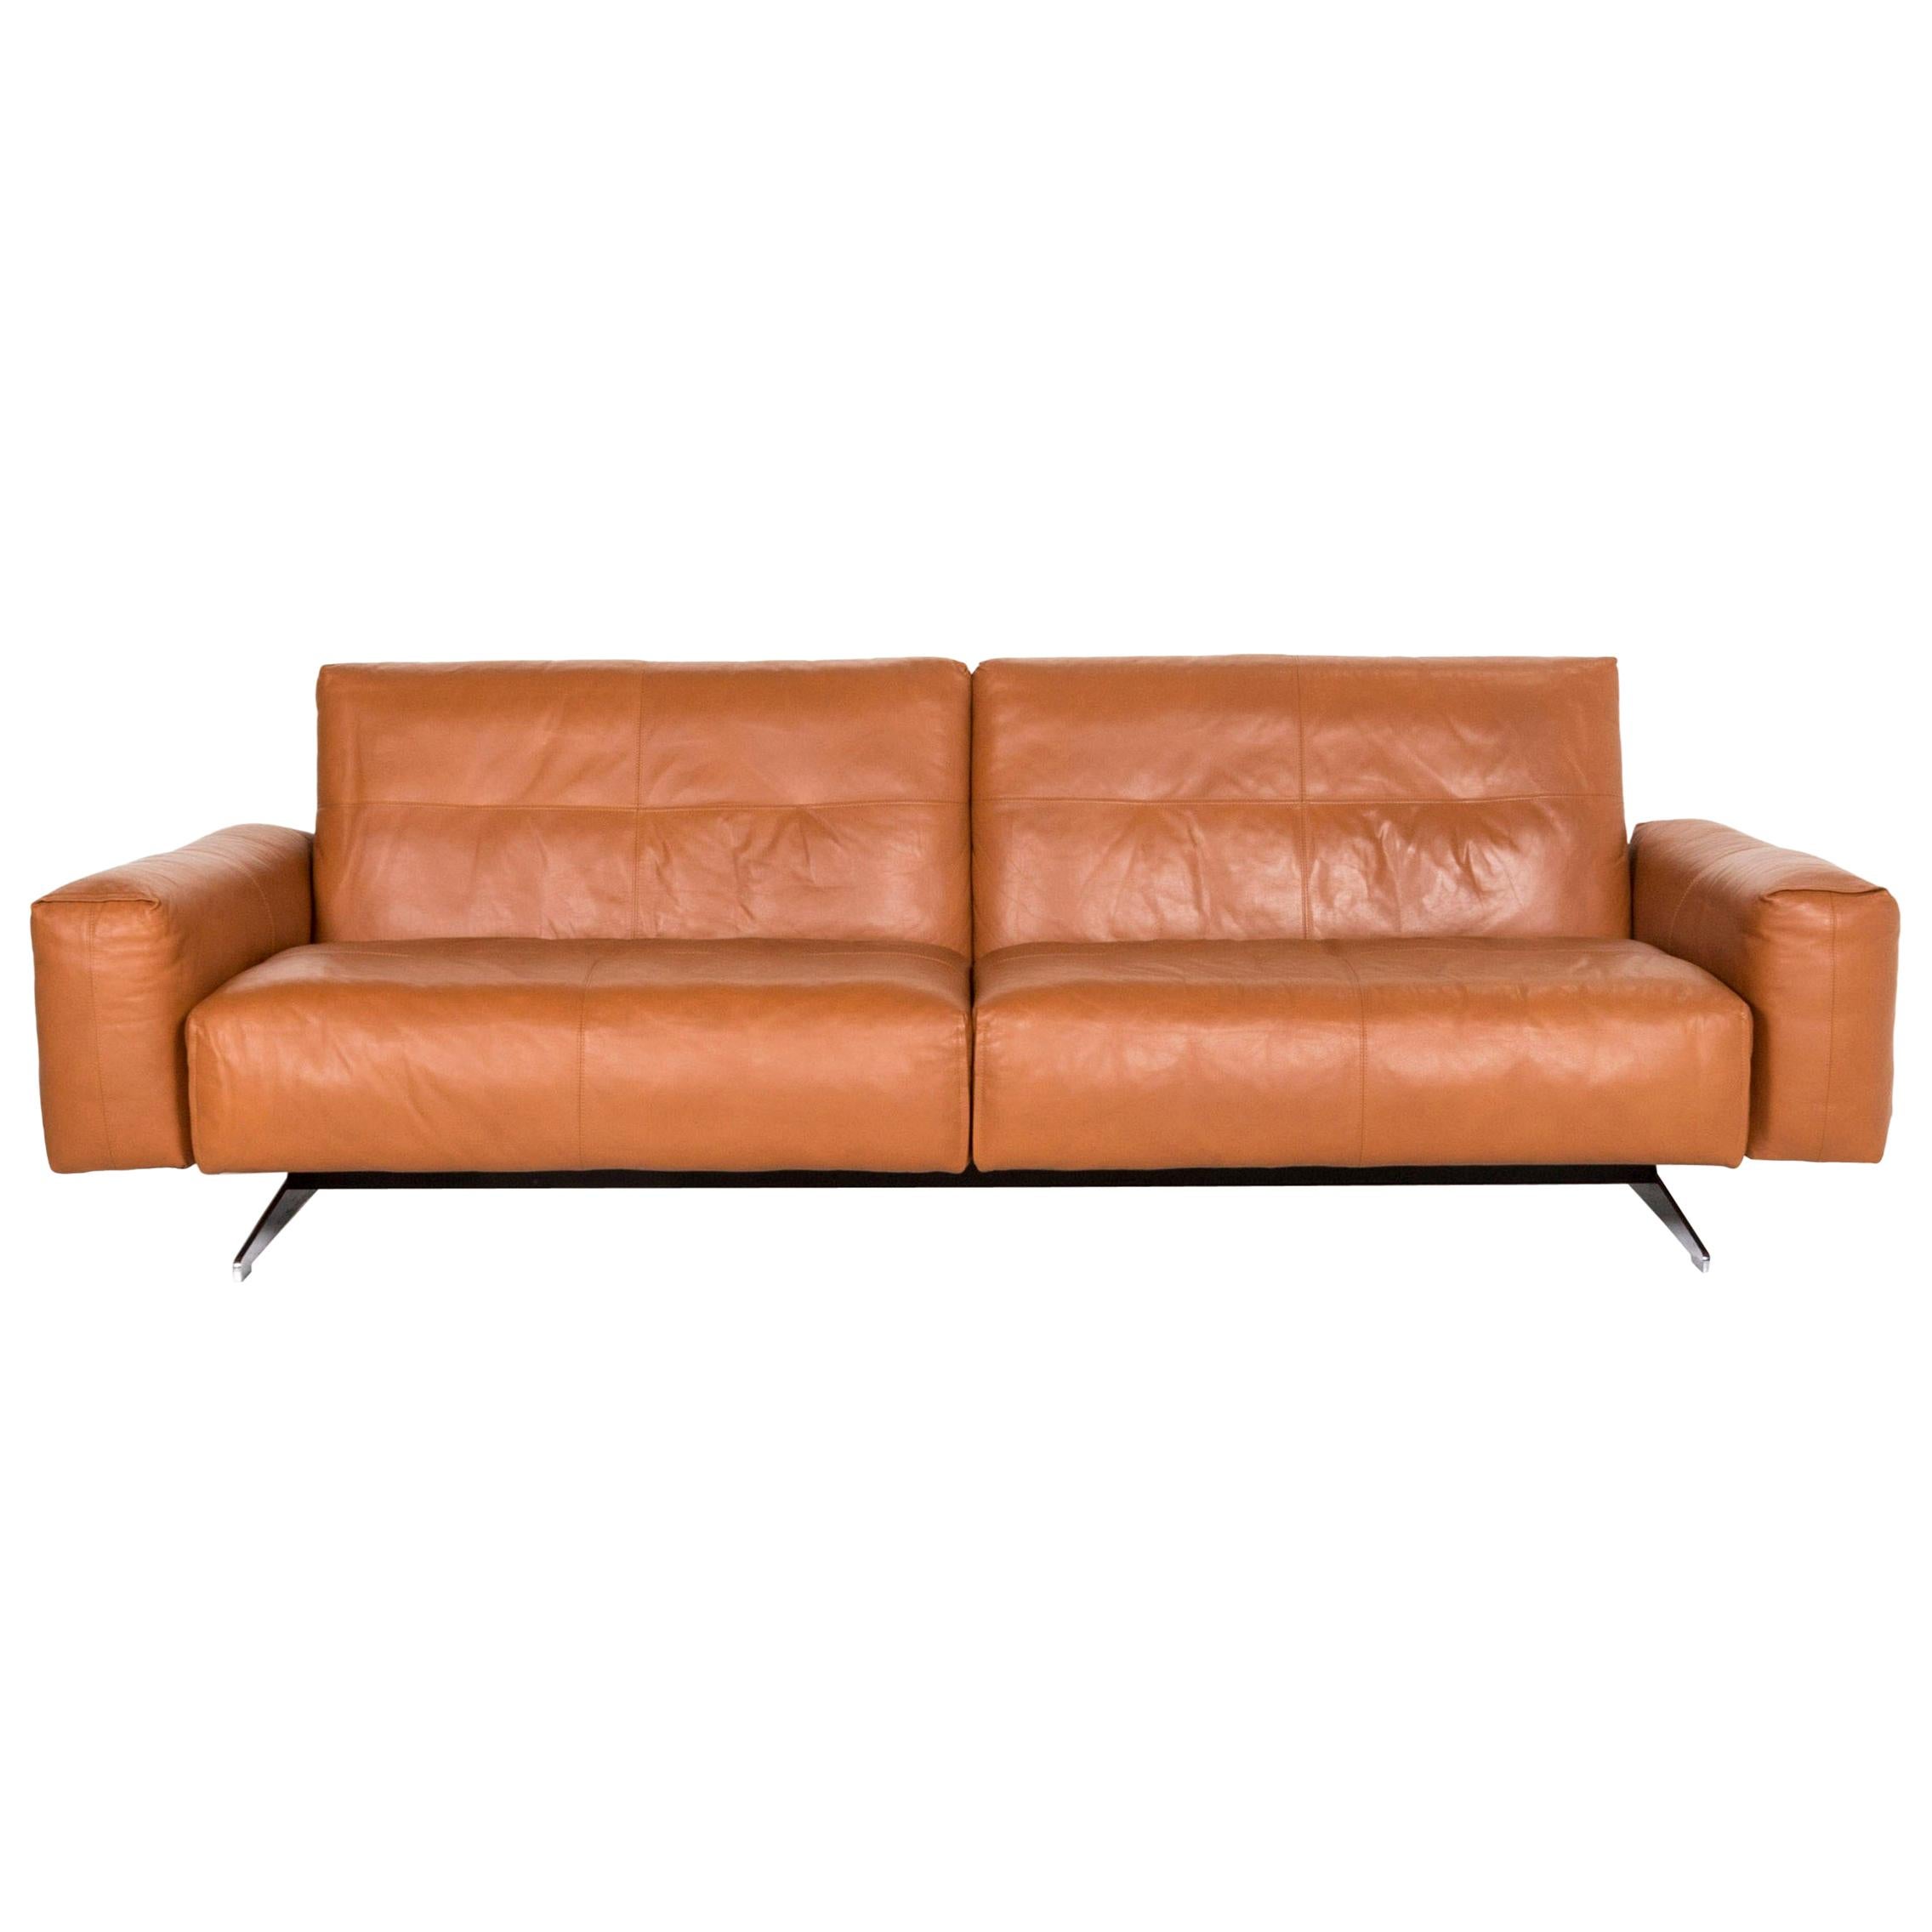 Rolf Benz 50 Leather Sofa Cognac Brown Three-Seat Couch